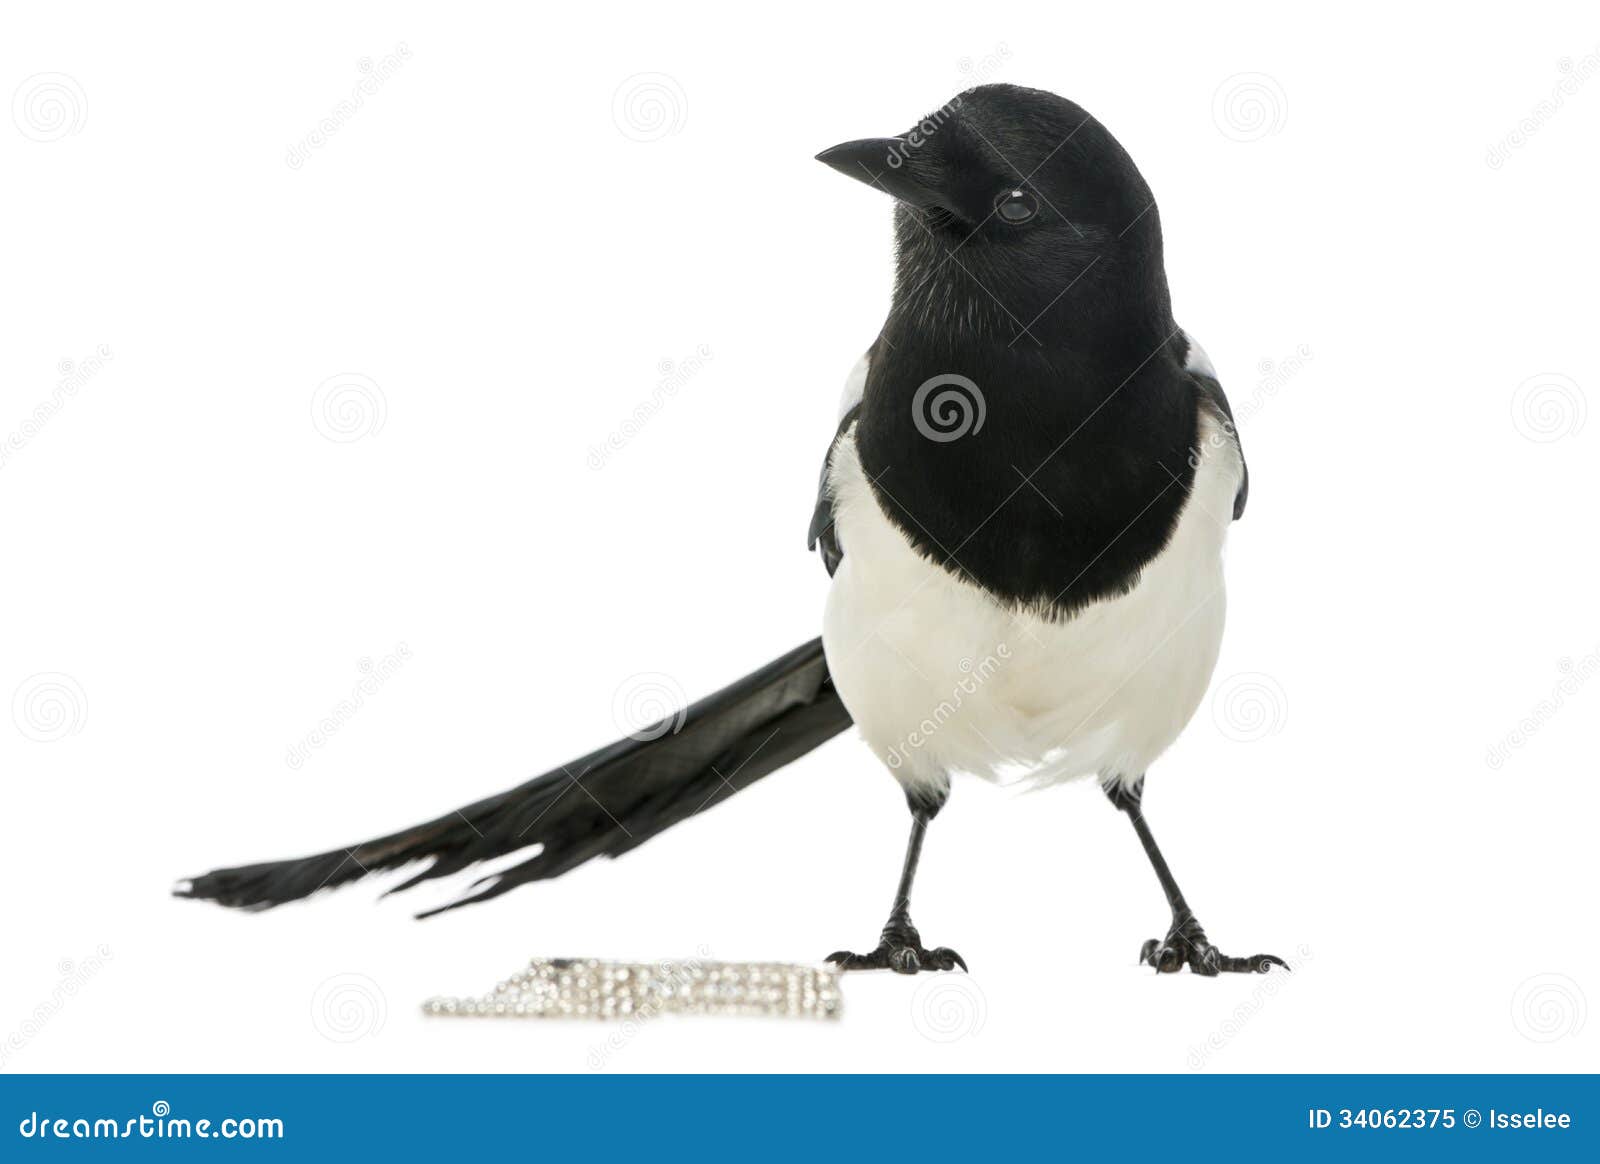 common magpie with jewellery, pica pica, 